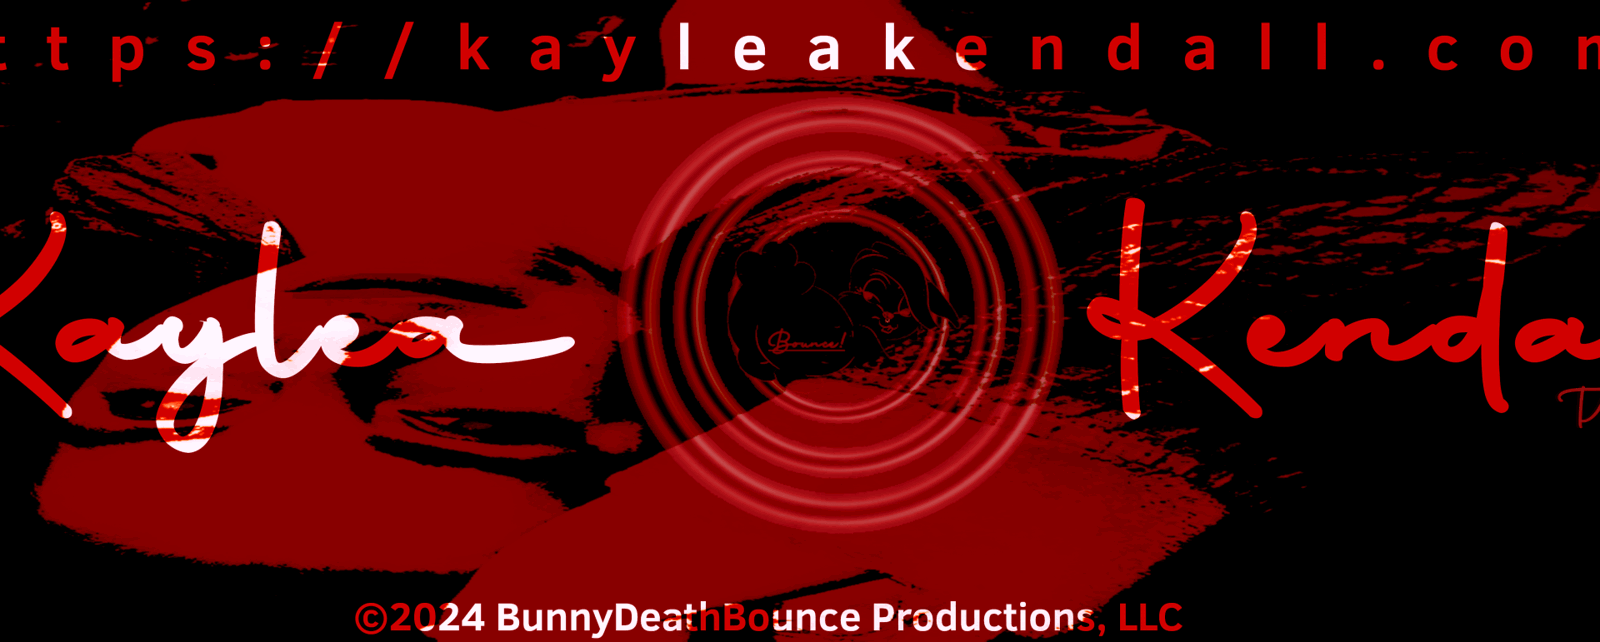 Cover photo of KayleaKendall